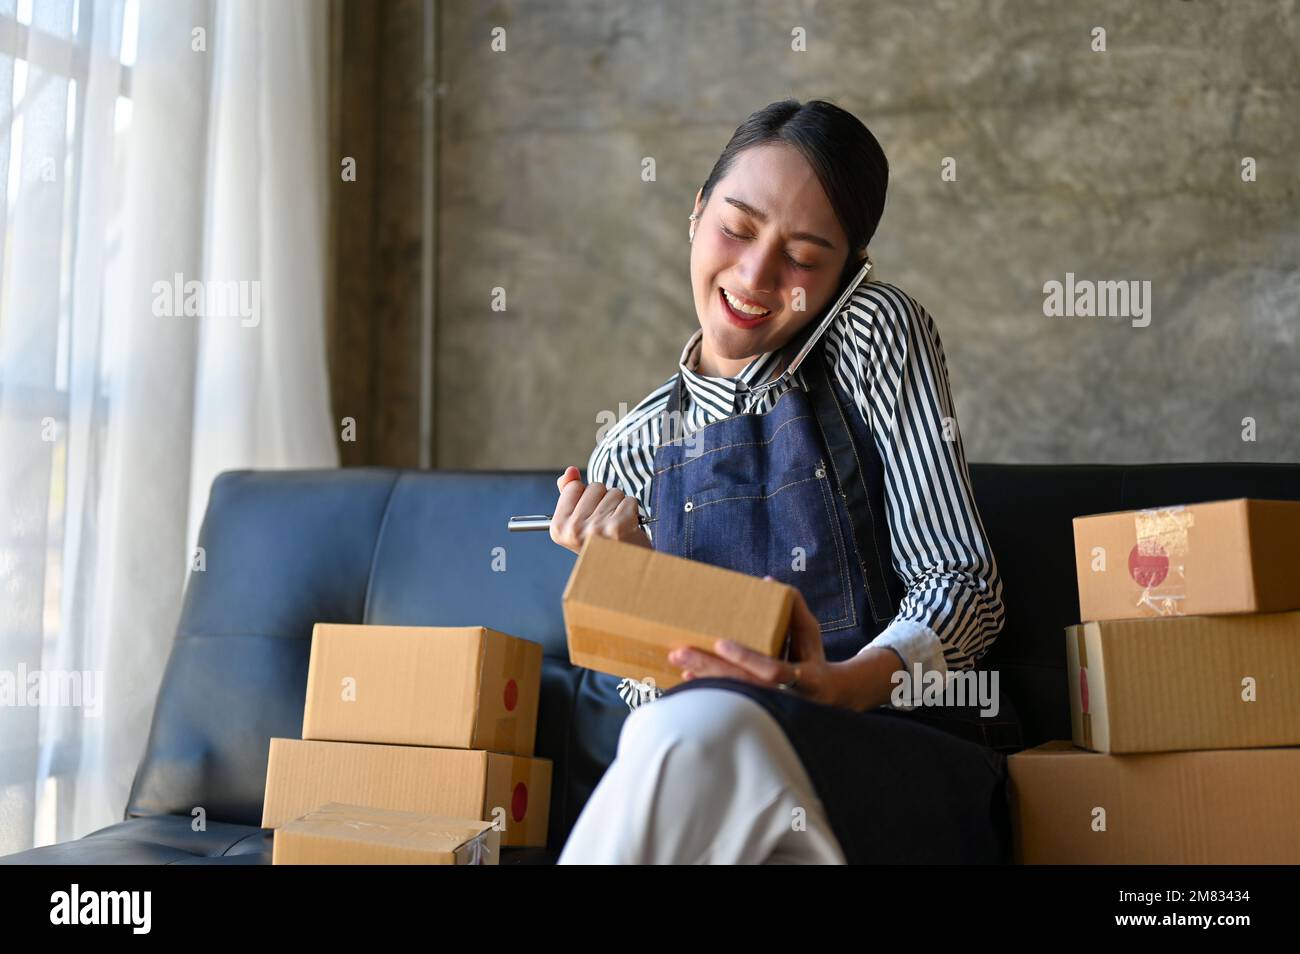 Charming and busy millennial Asian female e-commerce business entrepreneur or online seller is on the phone with her suppliers while preparing shippin Stock Photo